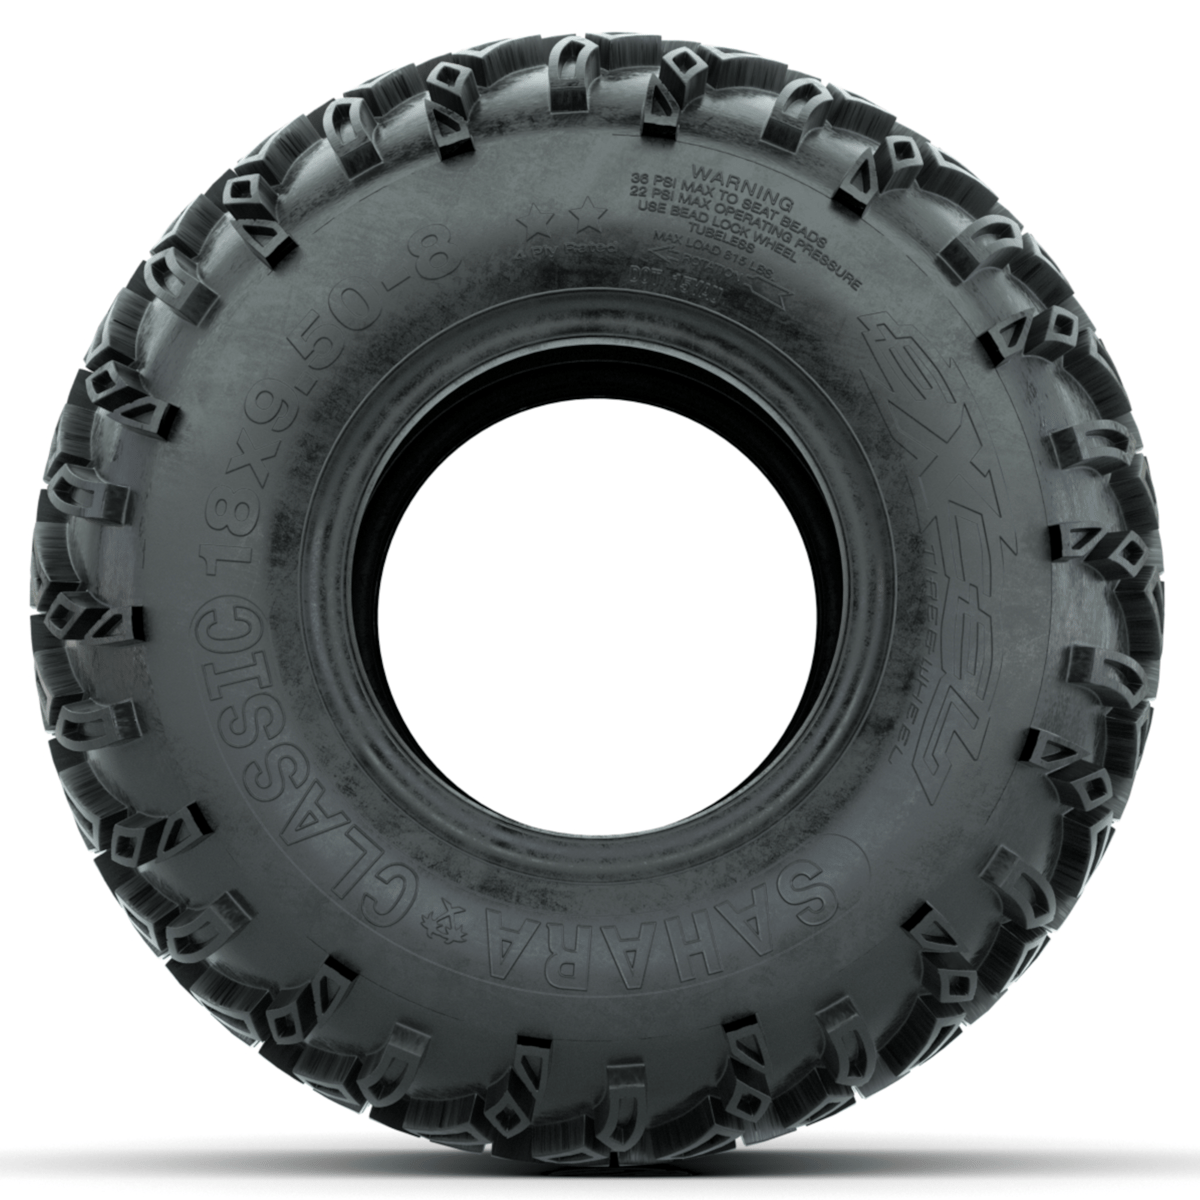 18x9.50-8 Sahara Classic A / T Tire (No Lift Required)